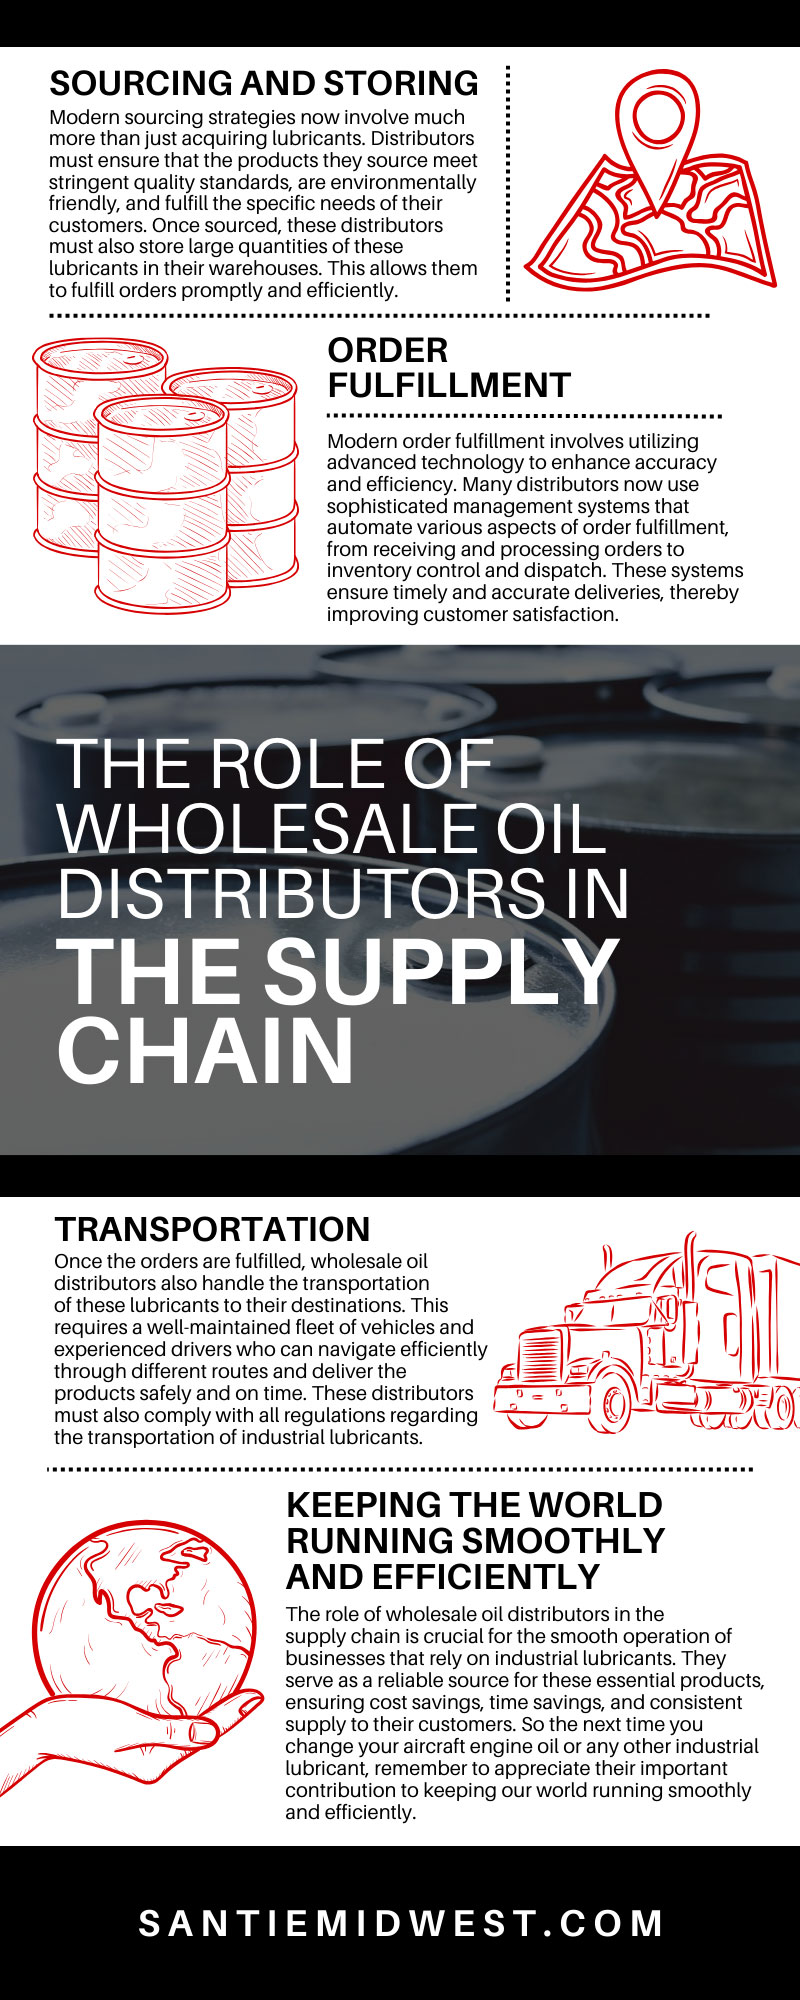 The Role of Wholesale Oil Distributors in the Supply Chain